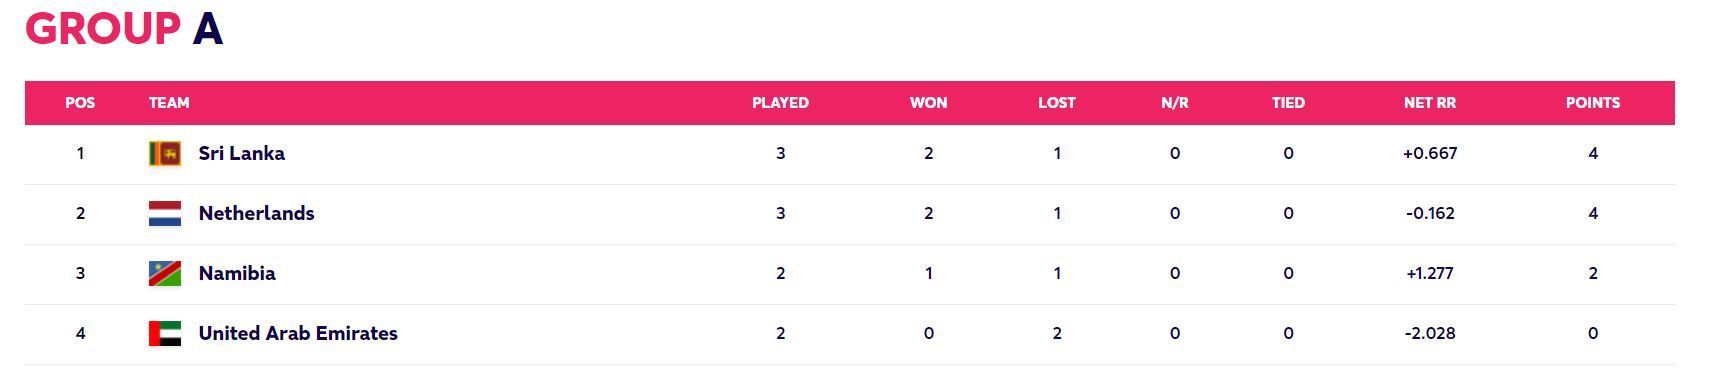 Updated Points Table after Match 9 (Image Courtesy: www.t20worldcup.com)